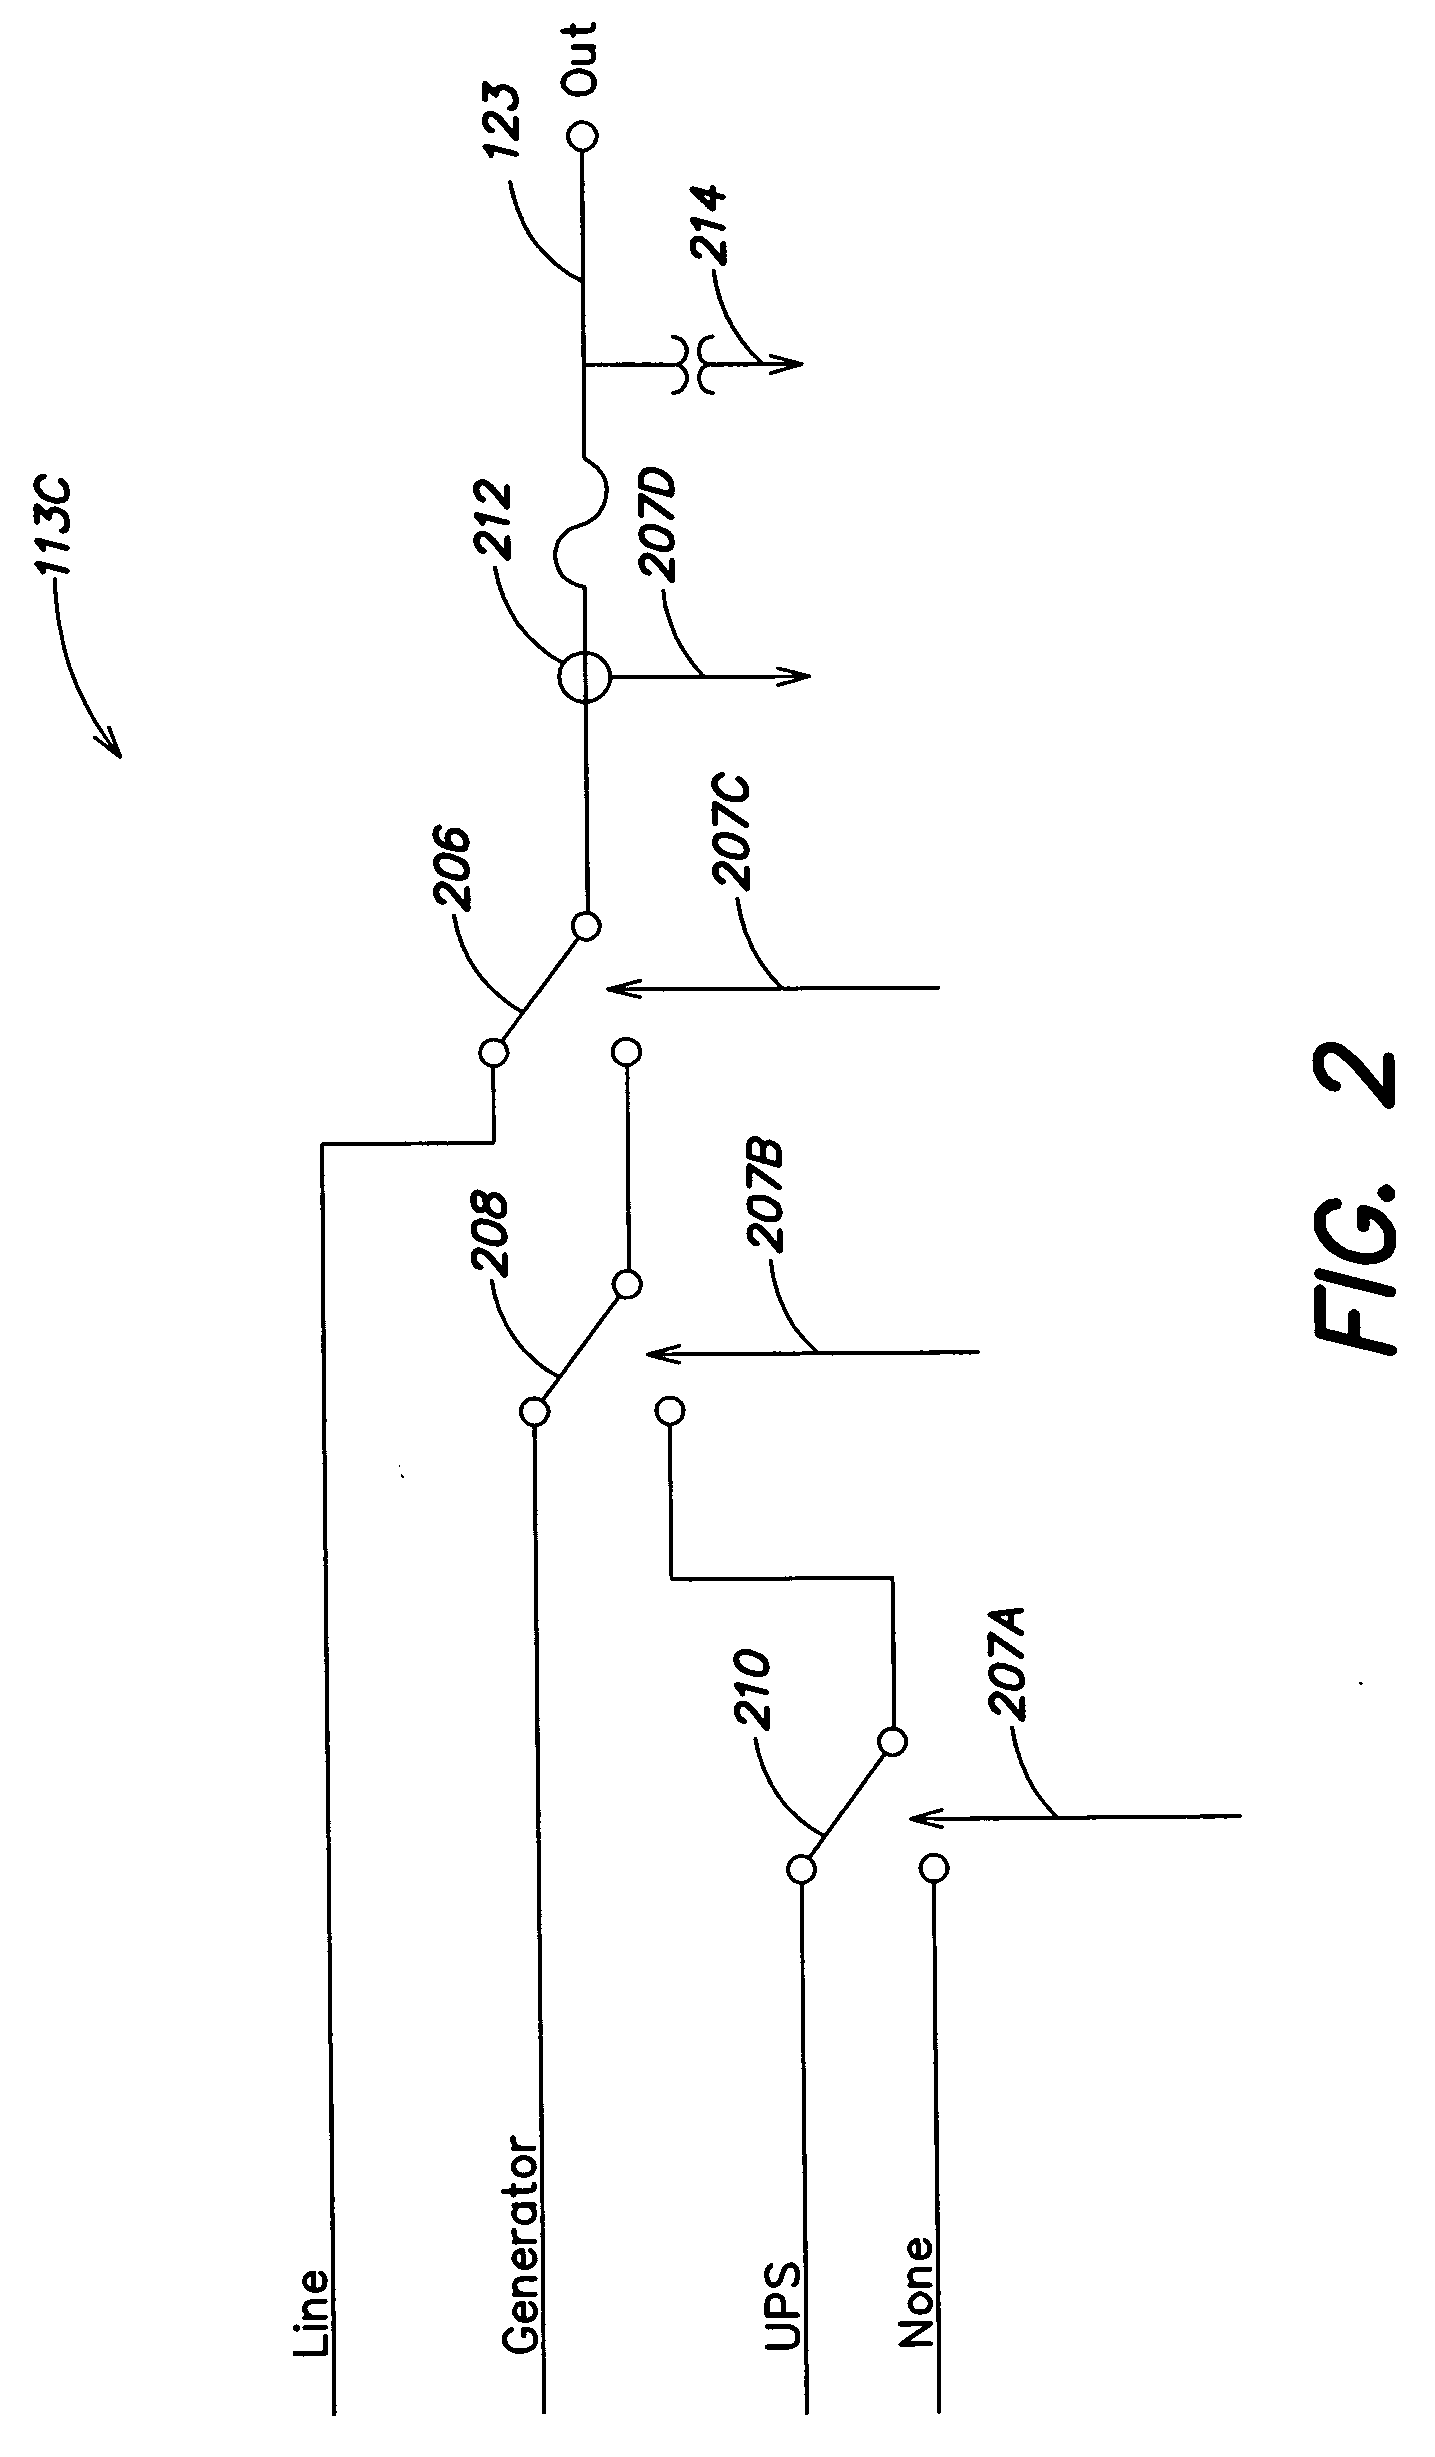 System and method for allocating power to loads